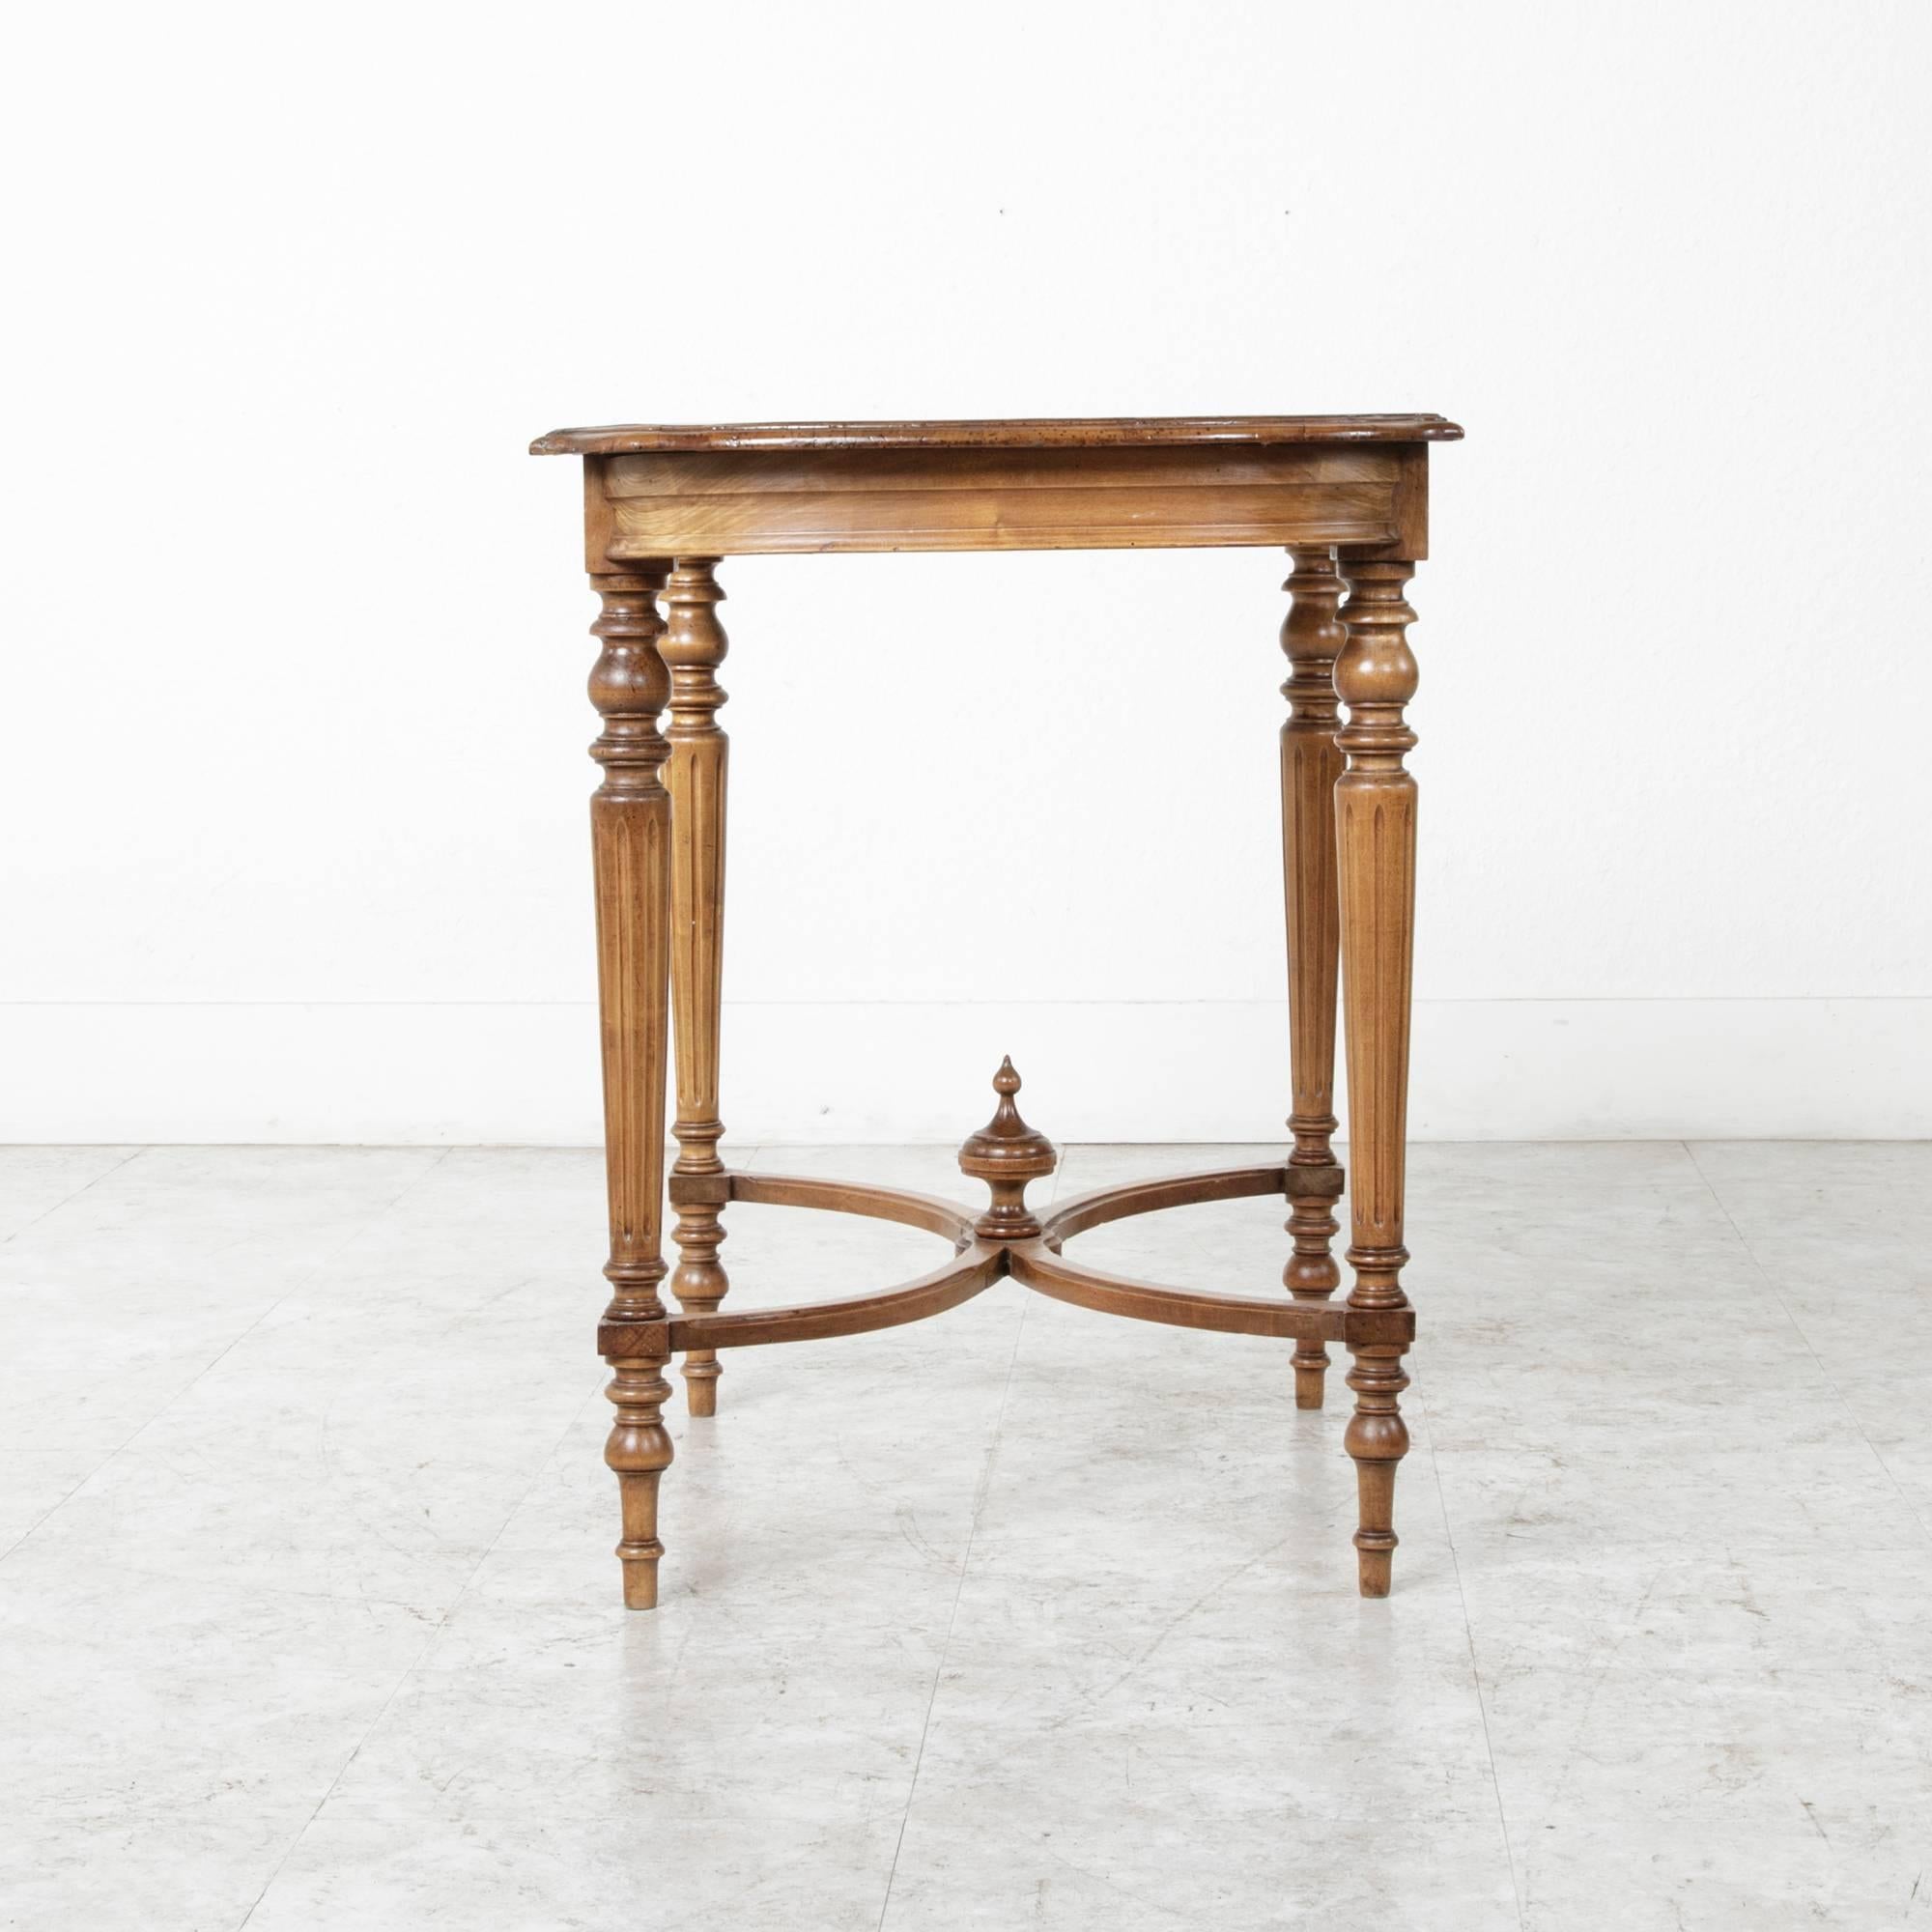 Inlay 19th Century Louis XVI Style Blond Mahogany Geometric Marquetry Side Table, Desk